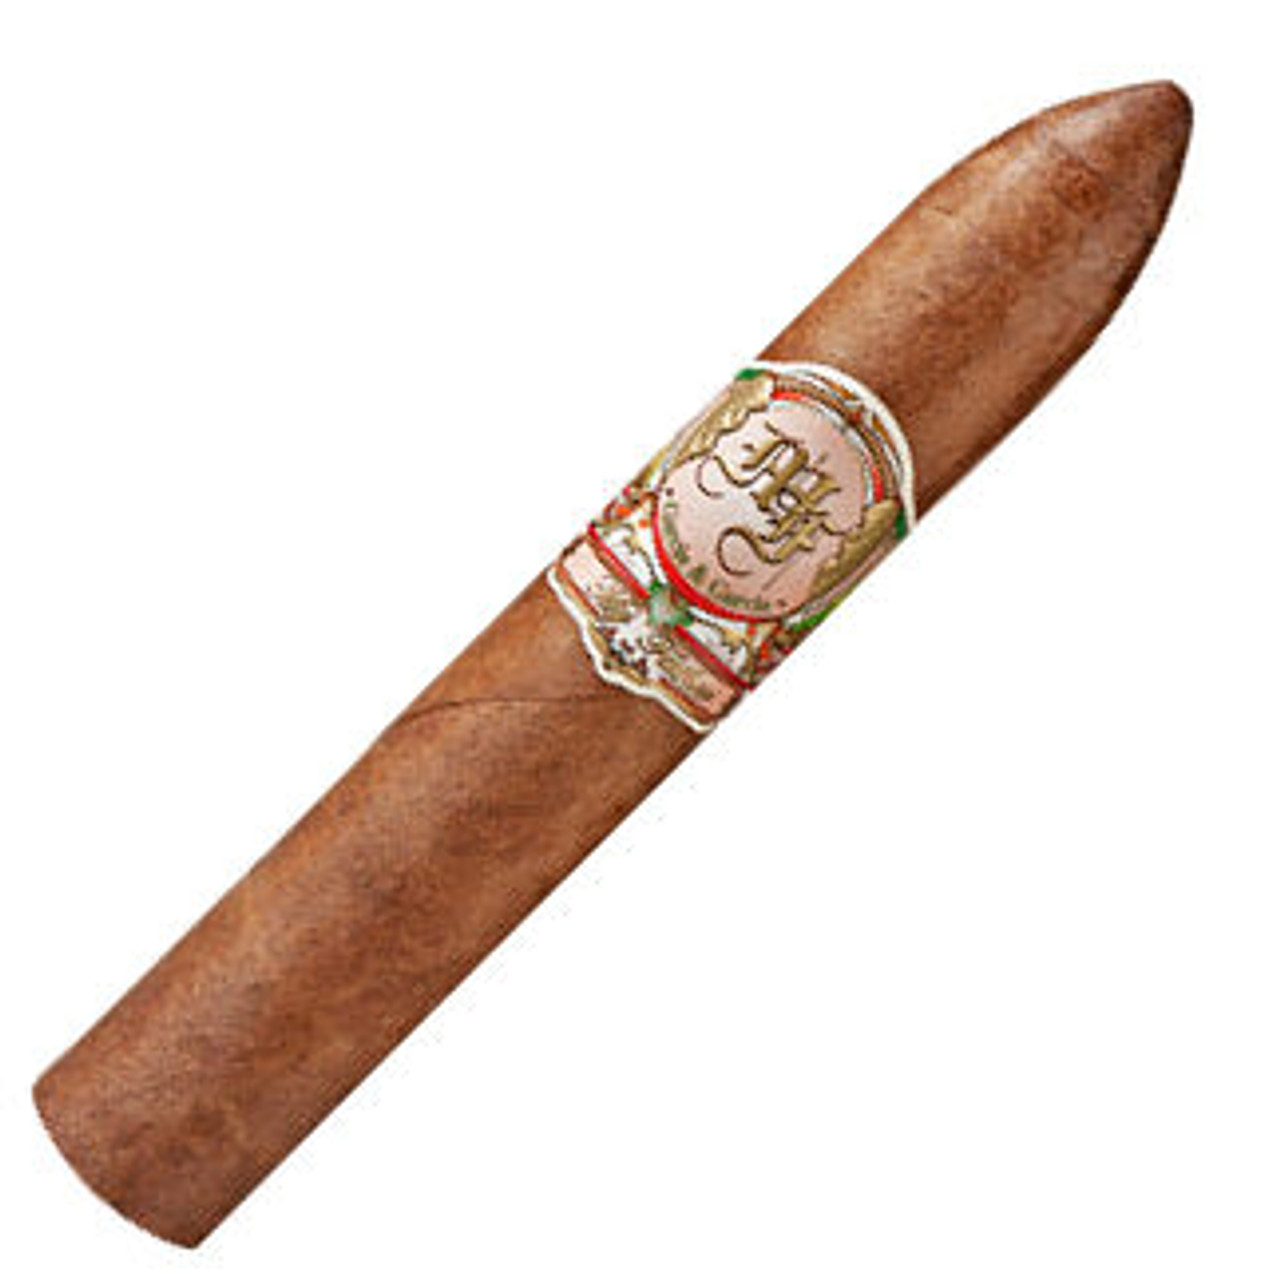 My Father No. 2 Belicoso Cigars - 5.5 x 54 (Box of 23)